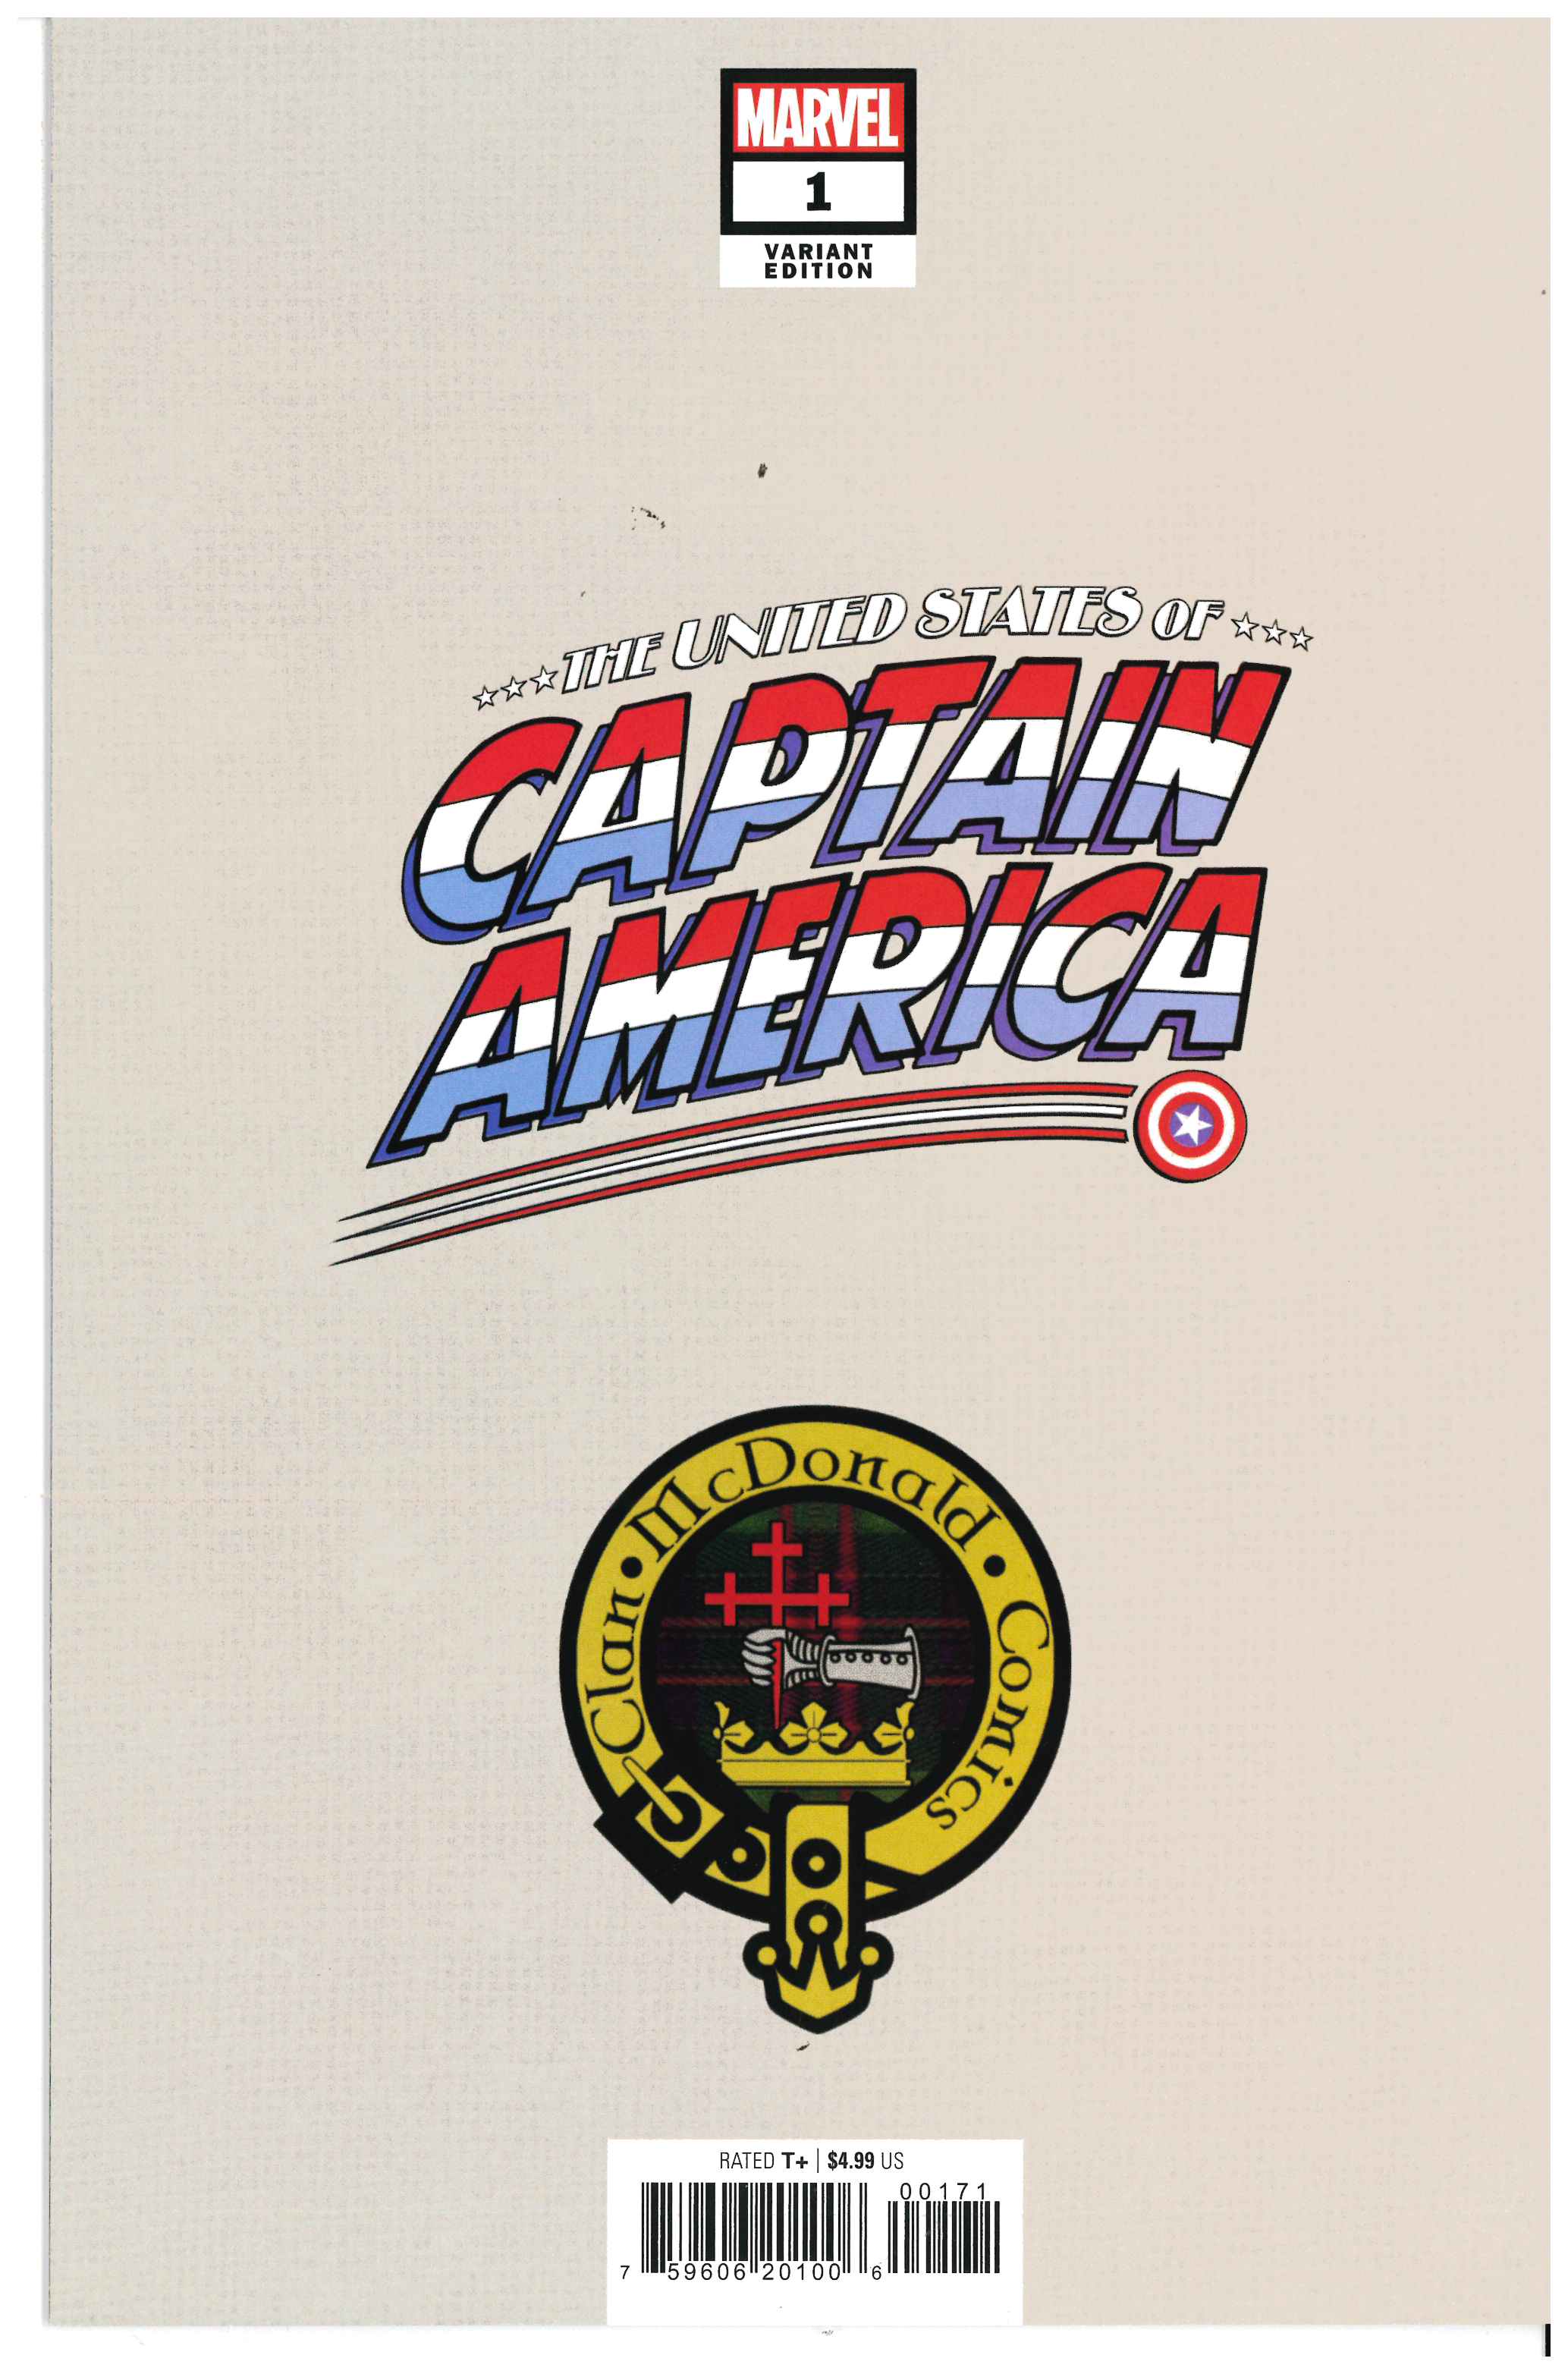 The United States of Captain America #1 backside